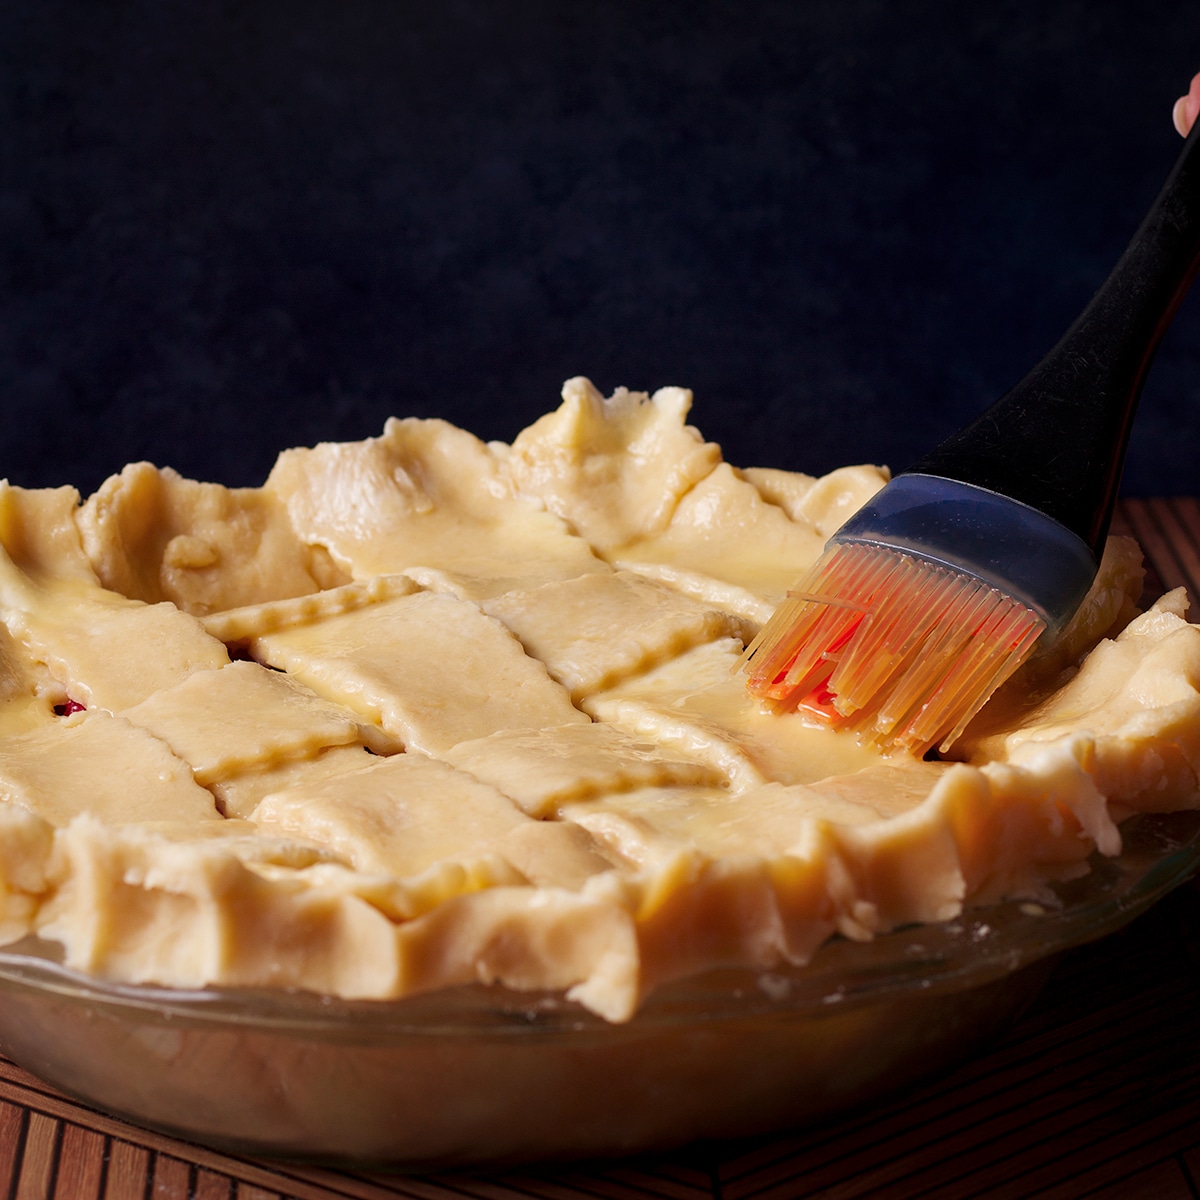 Using a pastry brush to coat the top of a pie crust with egg wash.